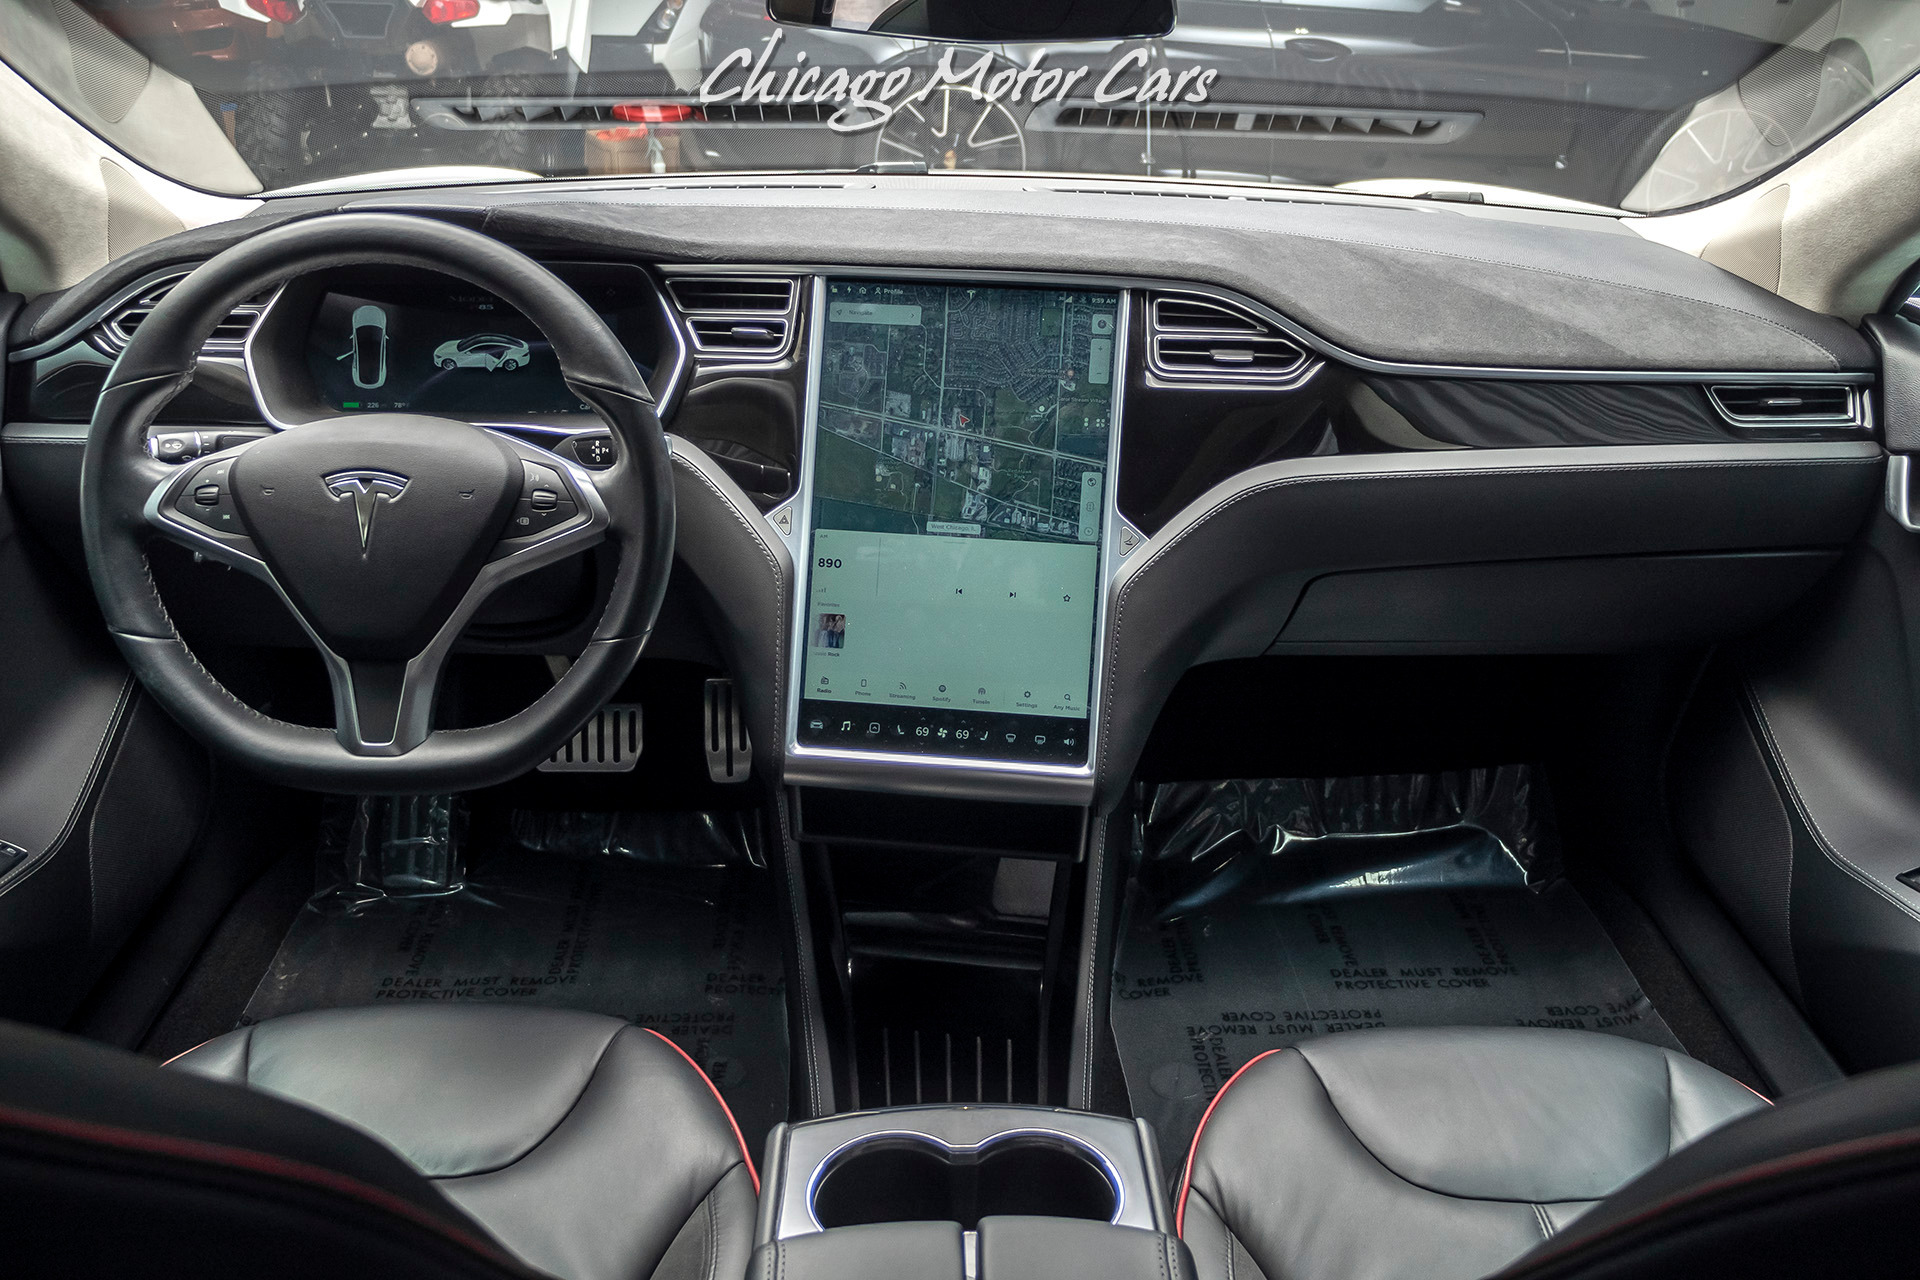 Used 2014 Tesla Model S P85 $115k+MSRP! Tech Package! Sound Pkg! For Sale (Special Pricing) | Chicago Motor Cars Stock